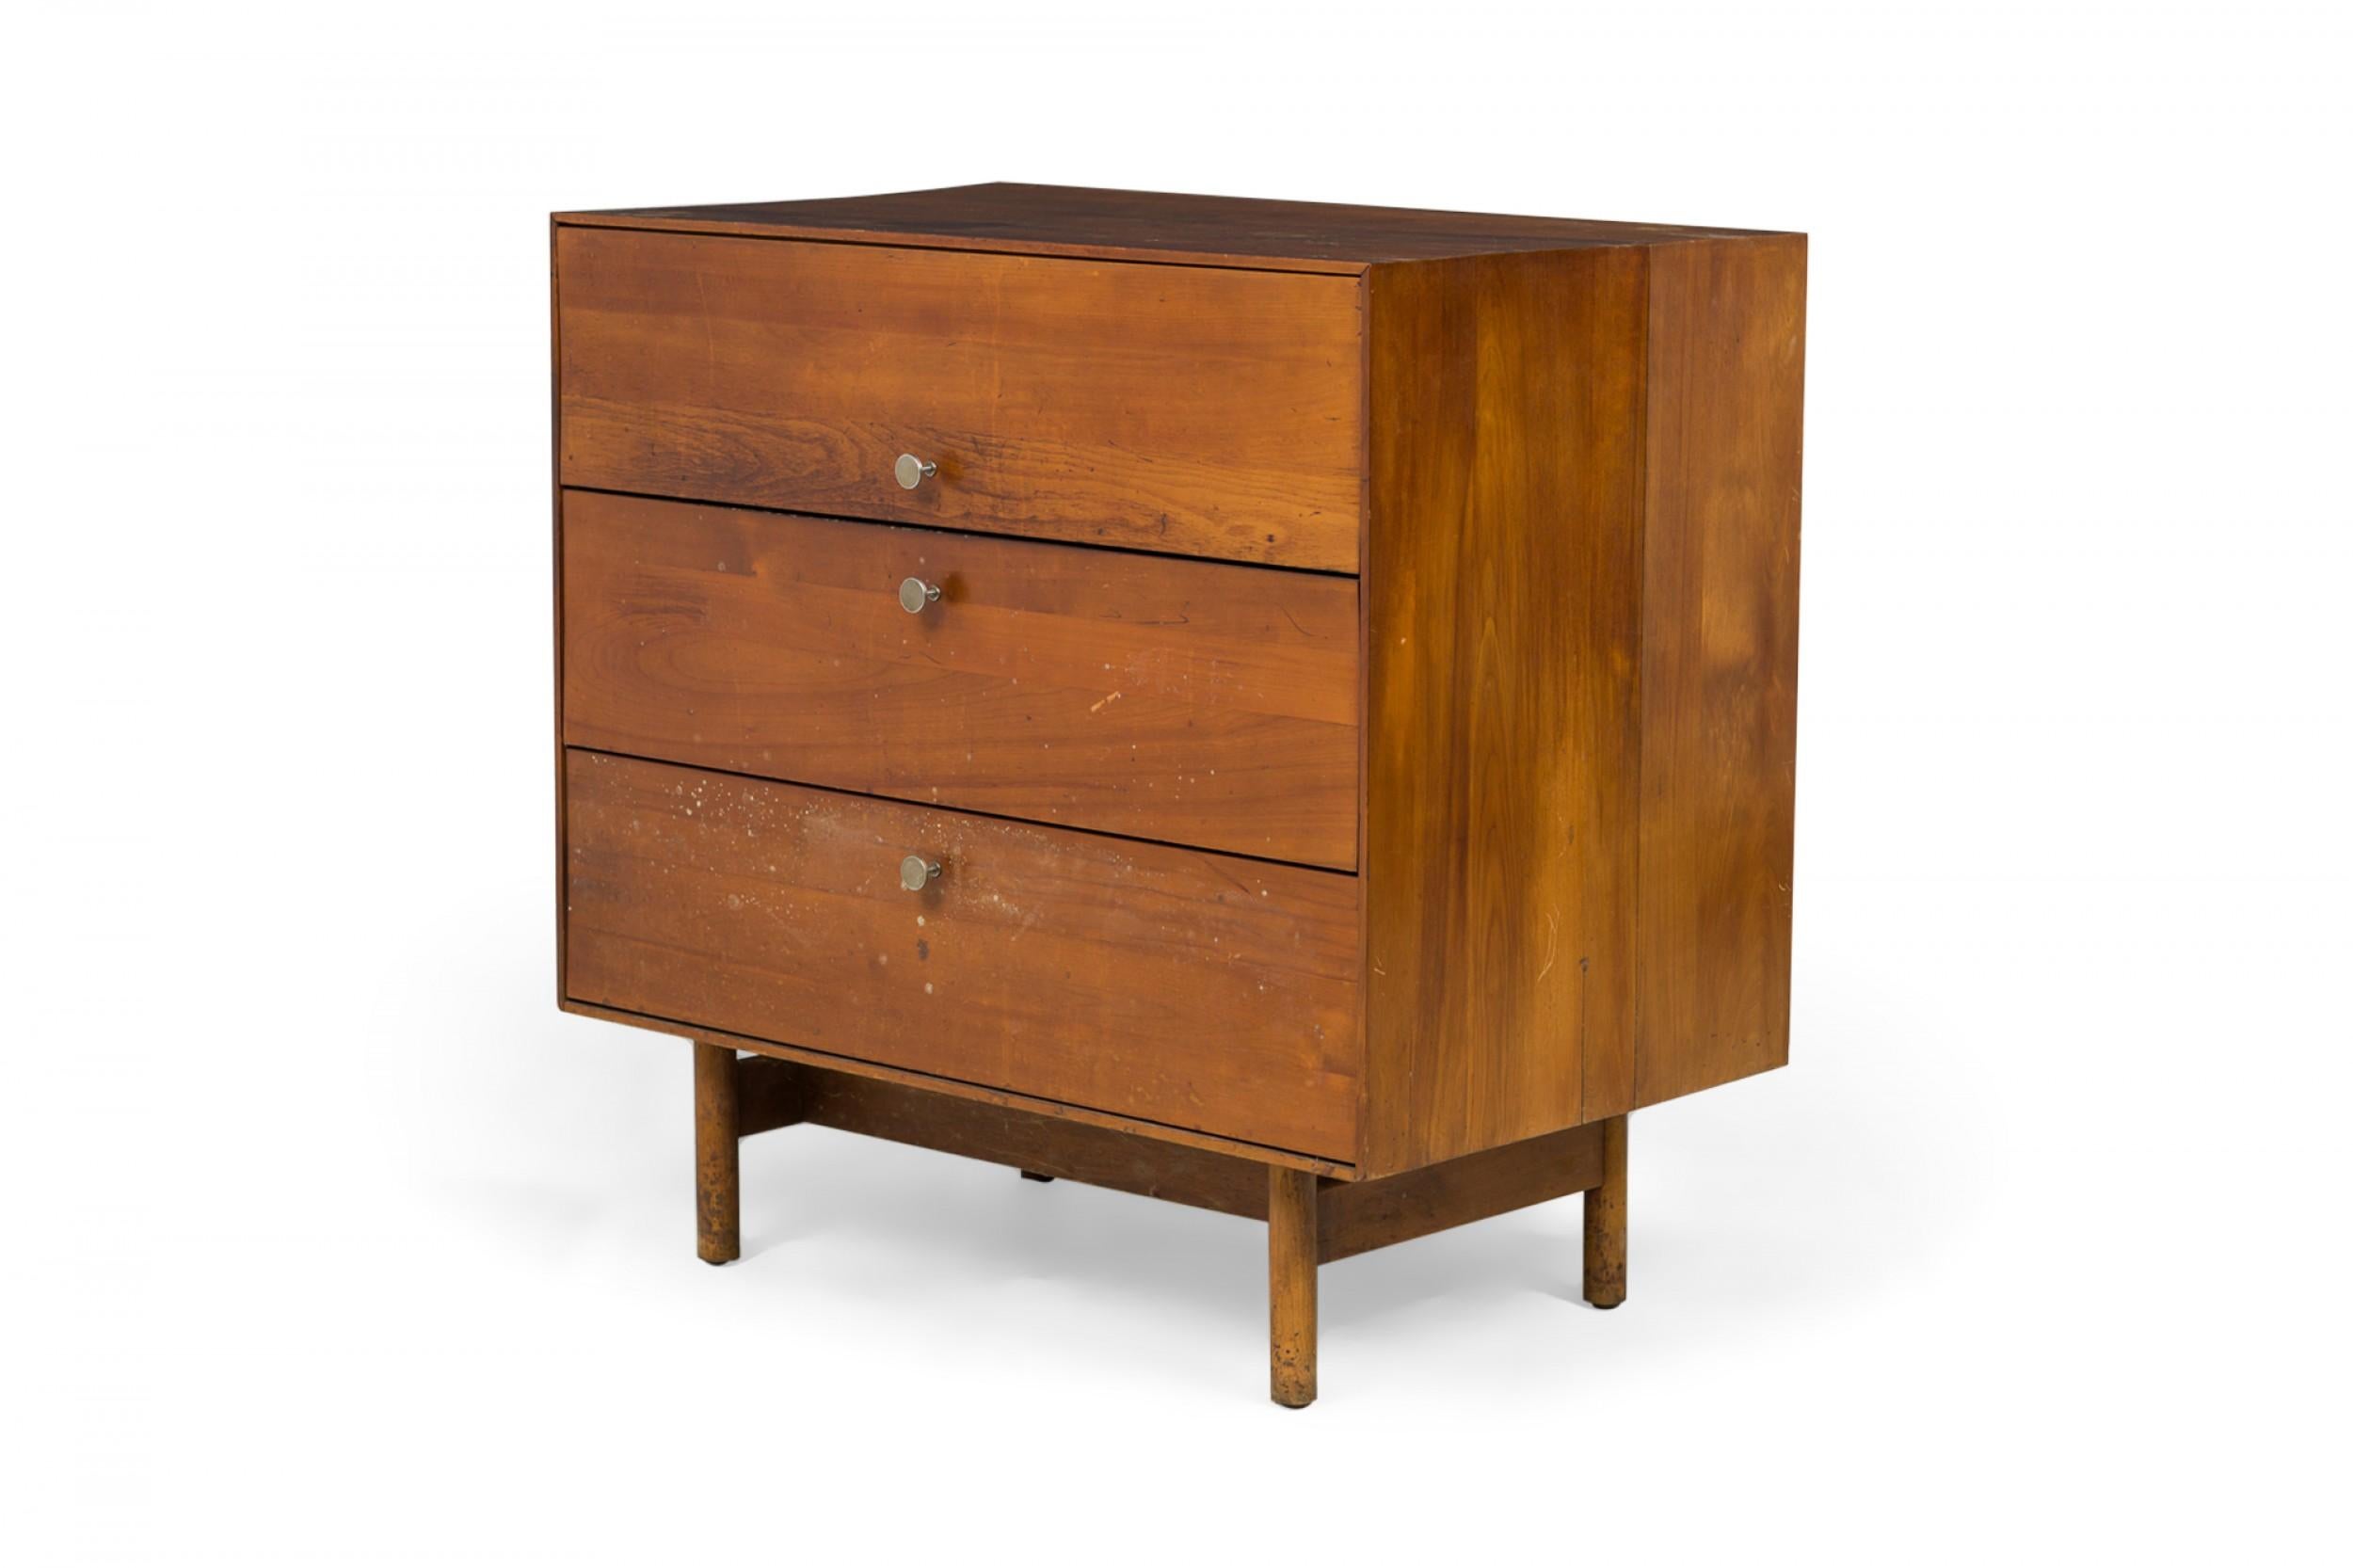 PAIR of American Mid-Century 3-drawer rectangular walnut chests with circular brushed chrome drawer pulls, resting on four dowel legs. (EDMOND SPENCE FOR WHITNEY FURNITURE CO.)(PRICED AS PAIR)
